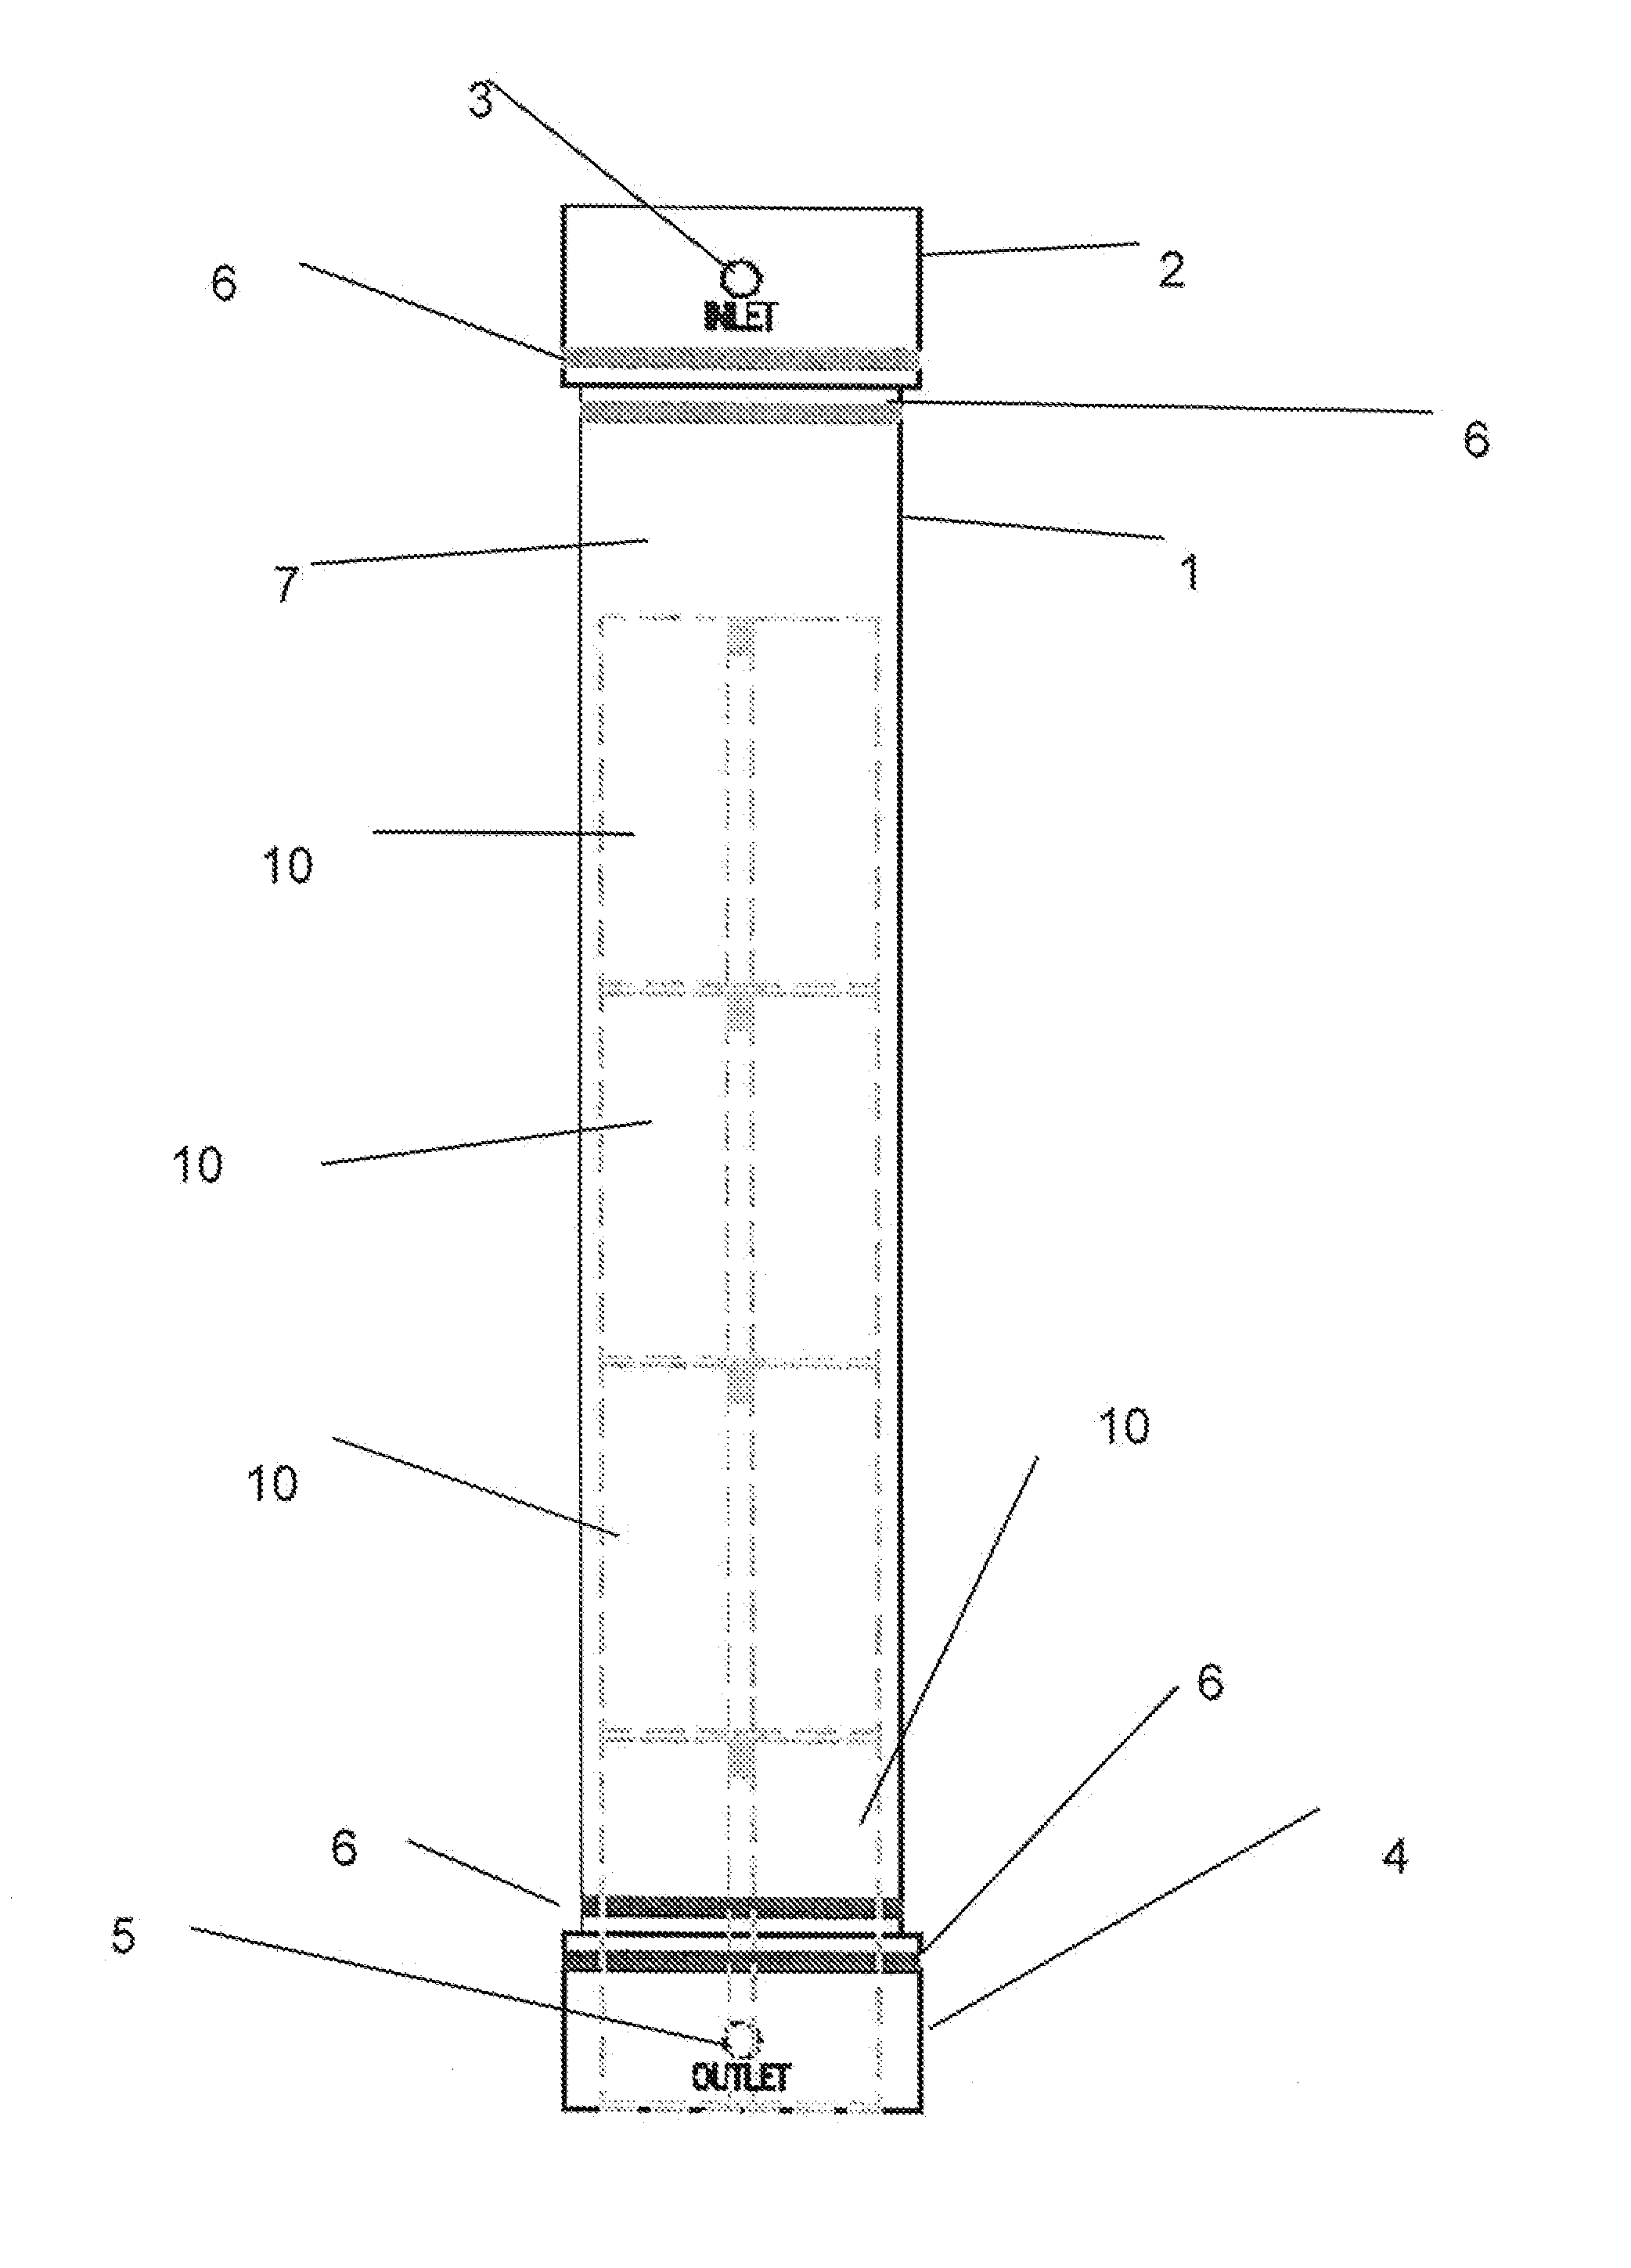 Accumulator Insert for Use With A Composite Sampling System